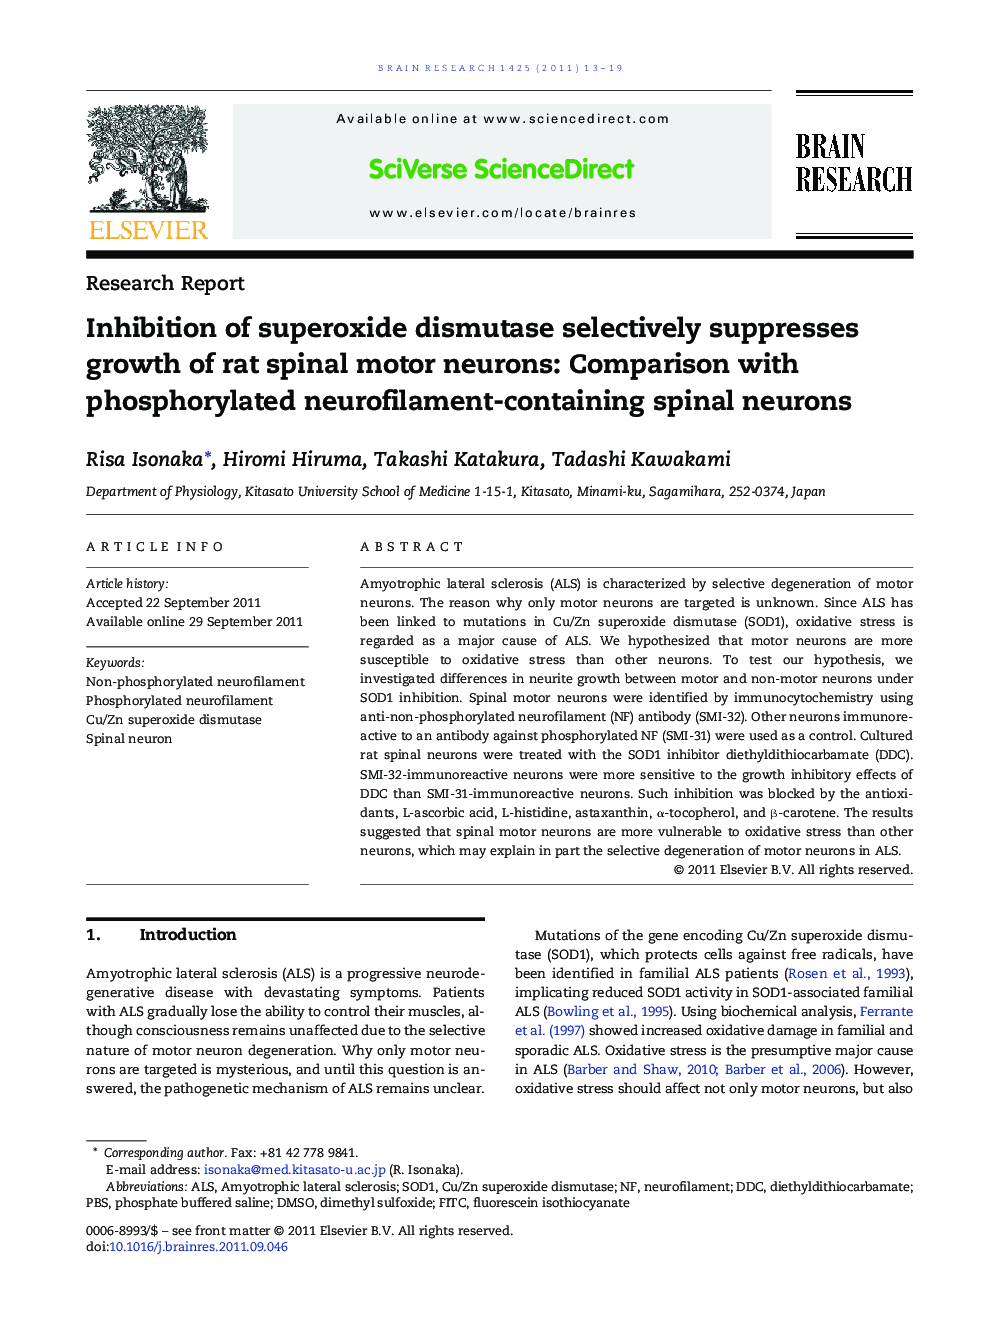 Research ReportInhibition of superoxide dismutase selectively suppresses growth of rat spinal motor neurons: Comparison with phosphorylated neurofilament-containing spinal neurons